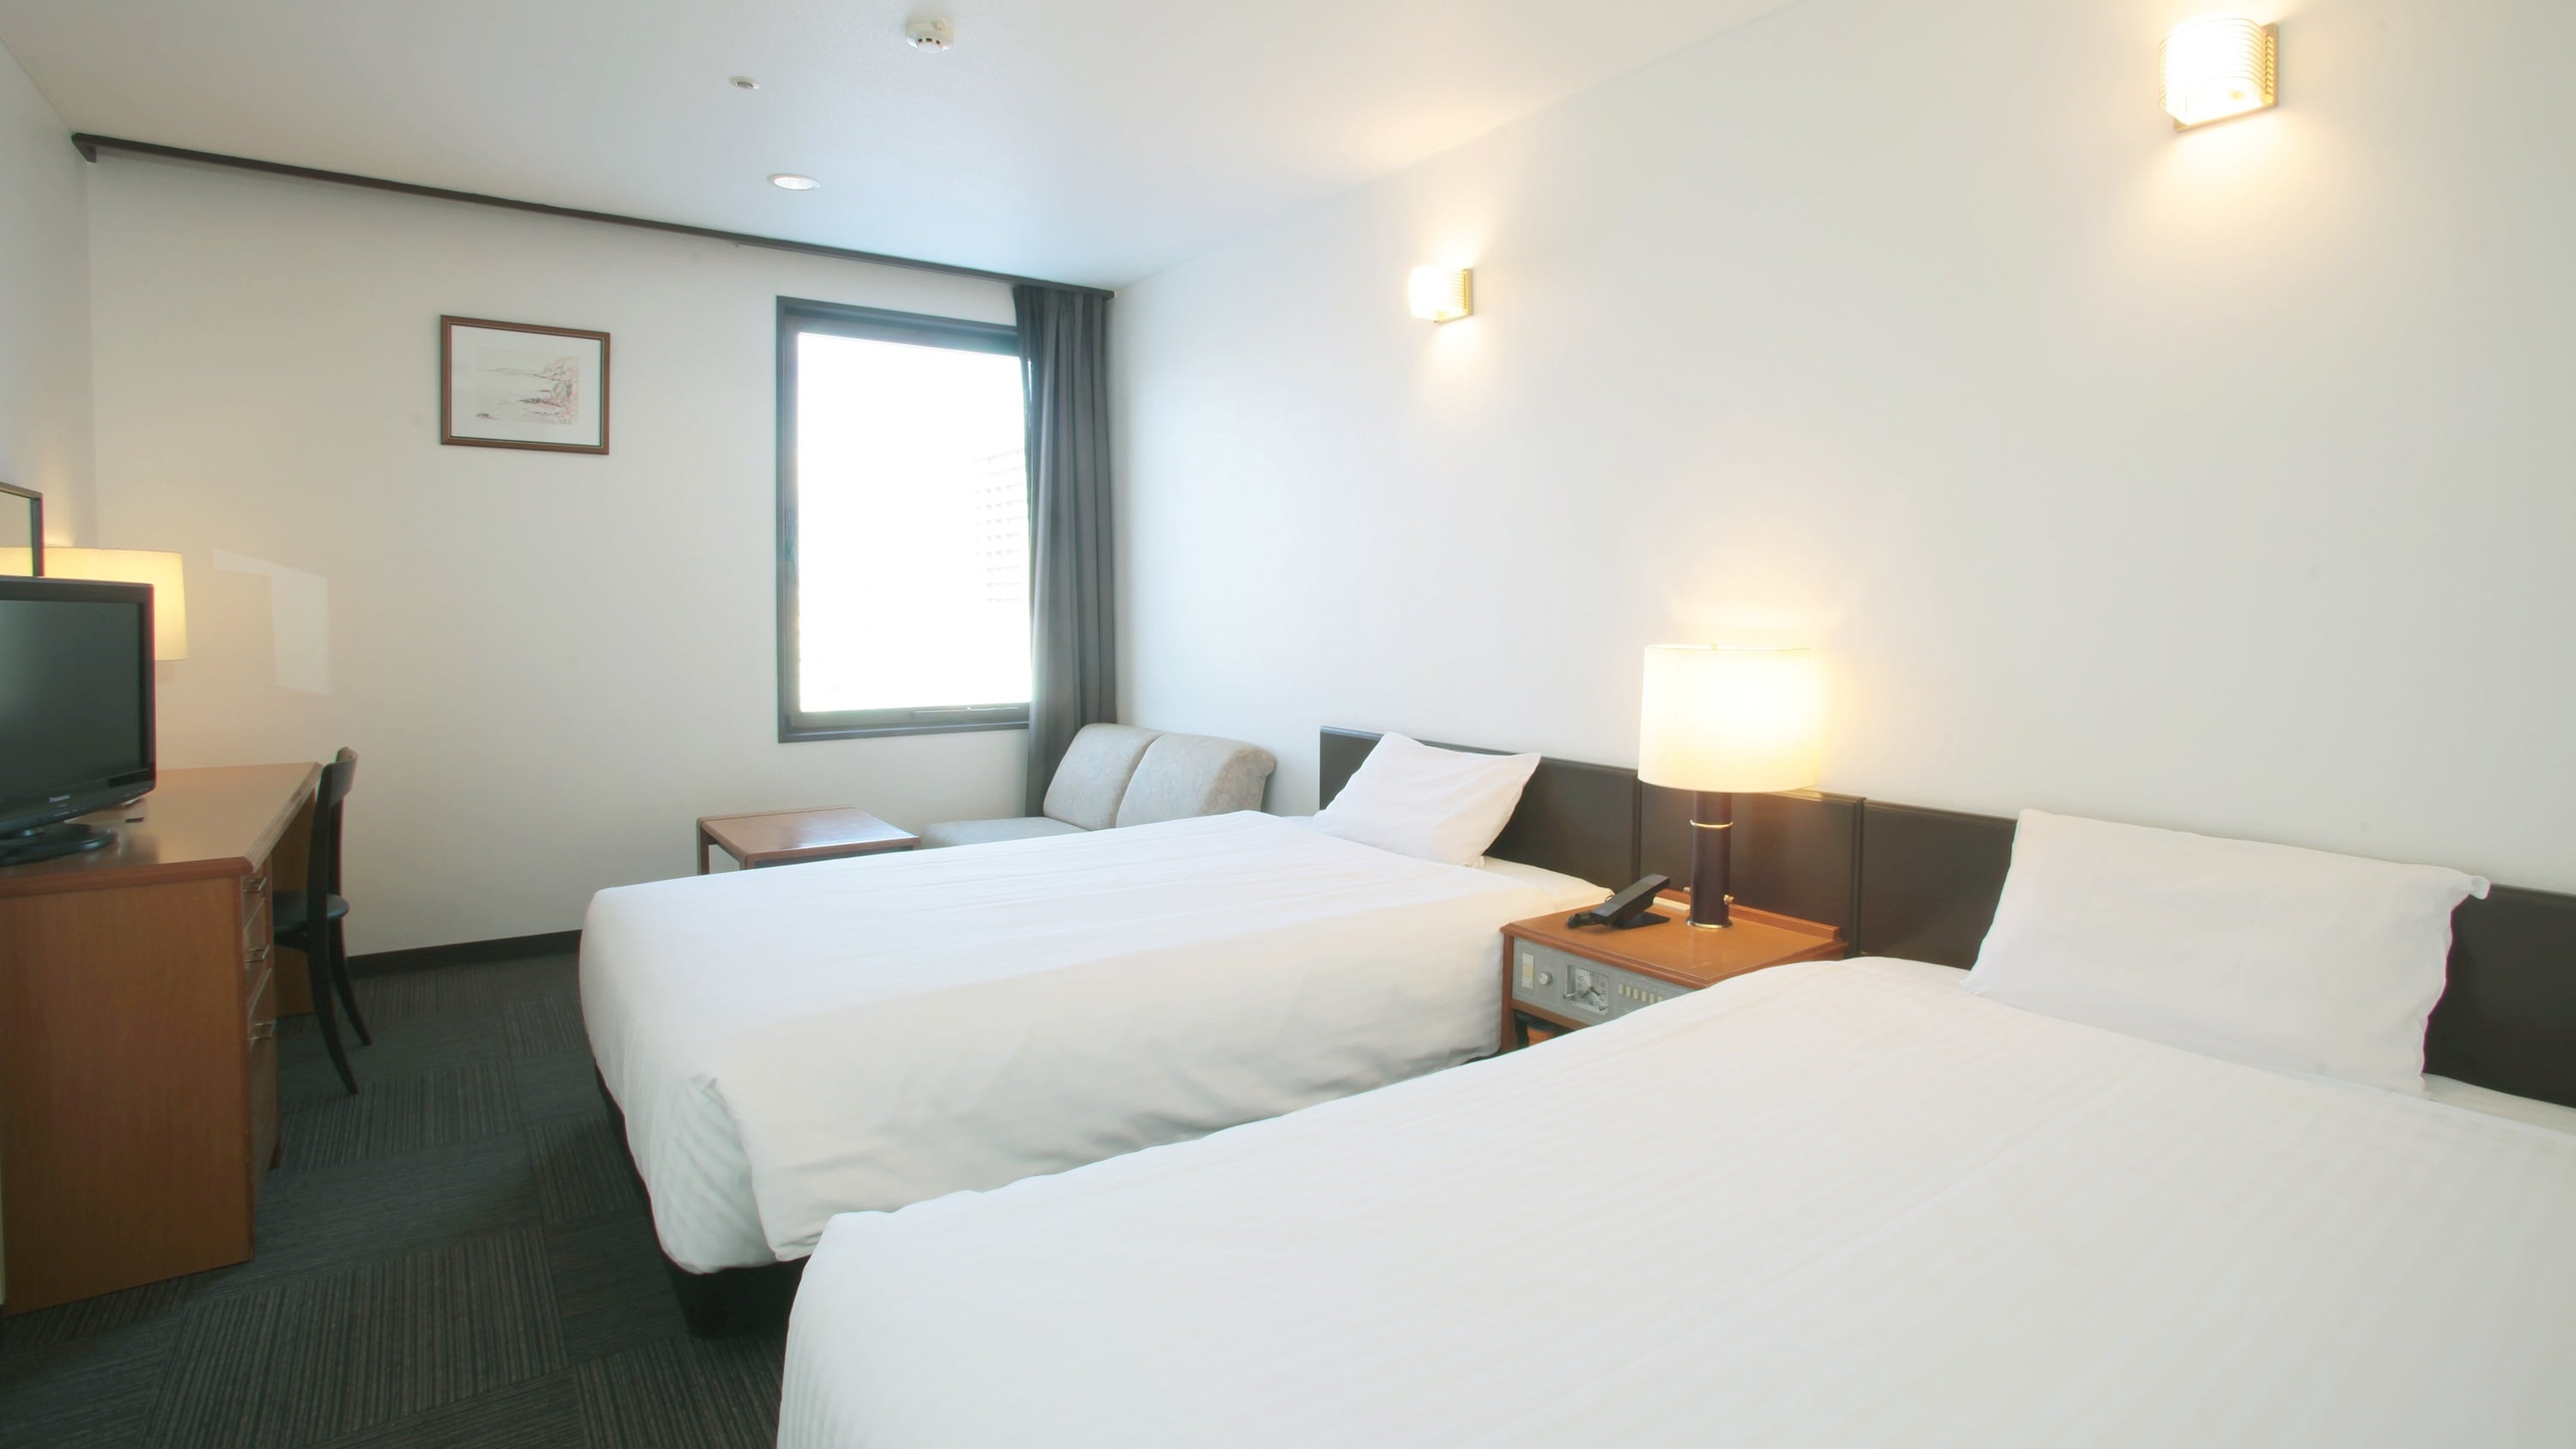 ■ Twin room ■ Spacious 23.4㎡ ～ / Bed width 120cm